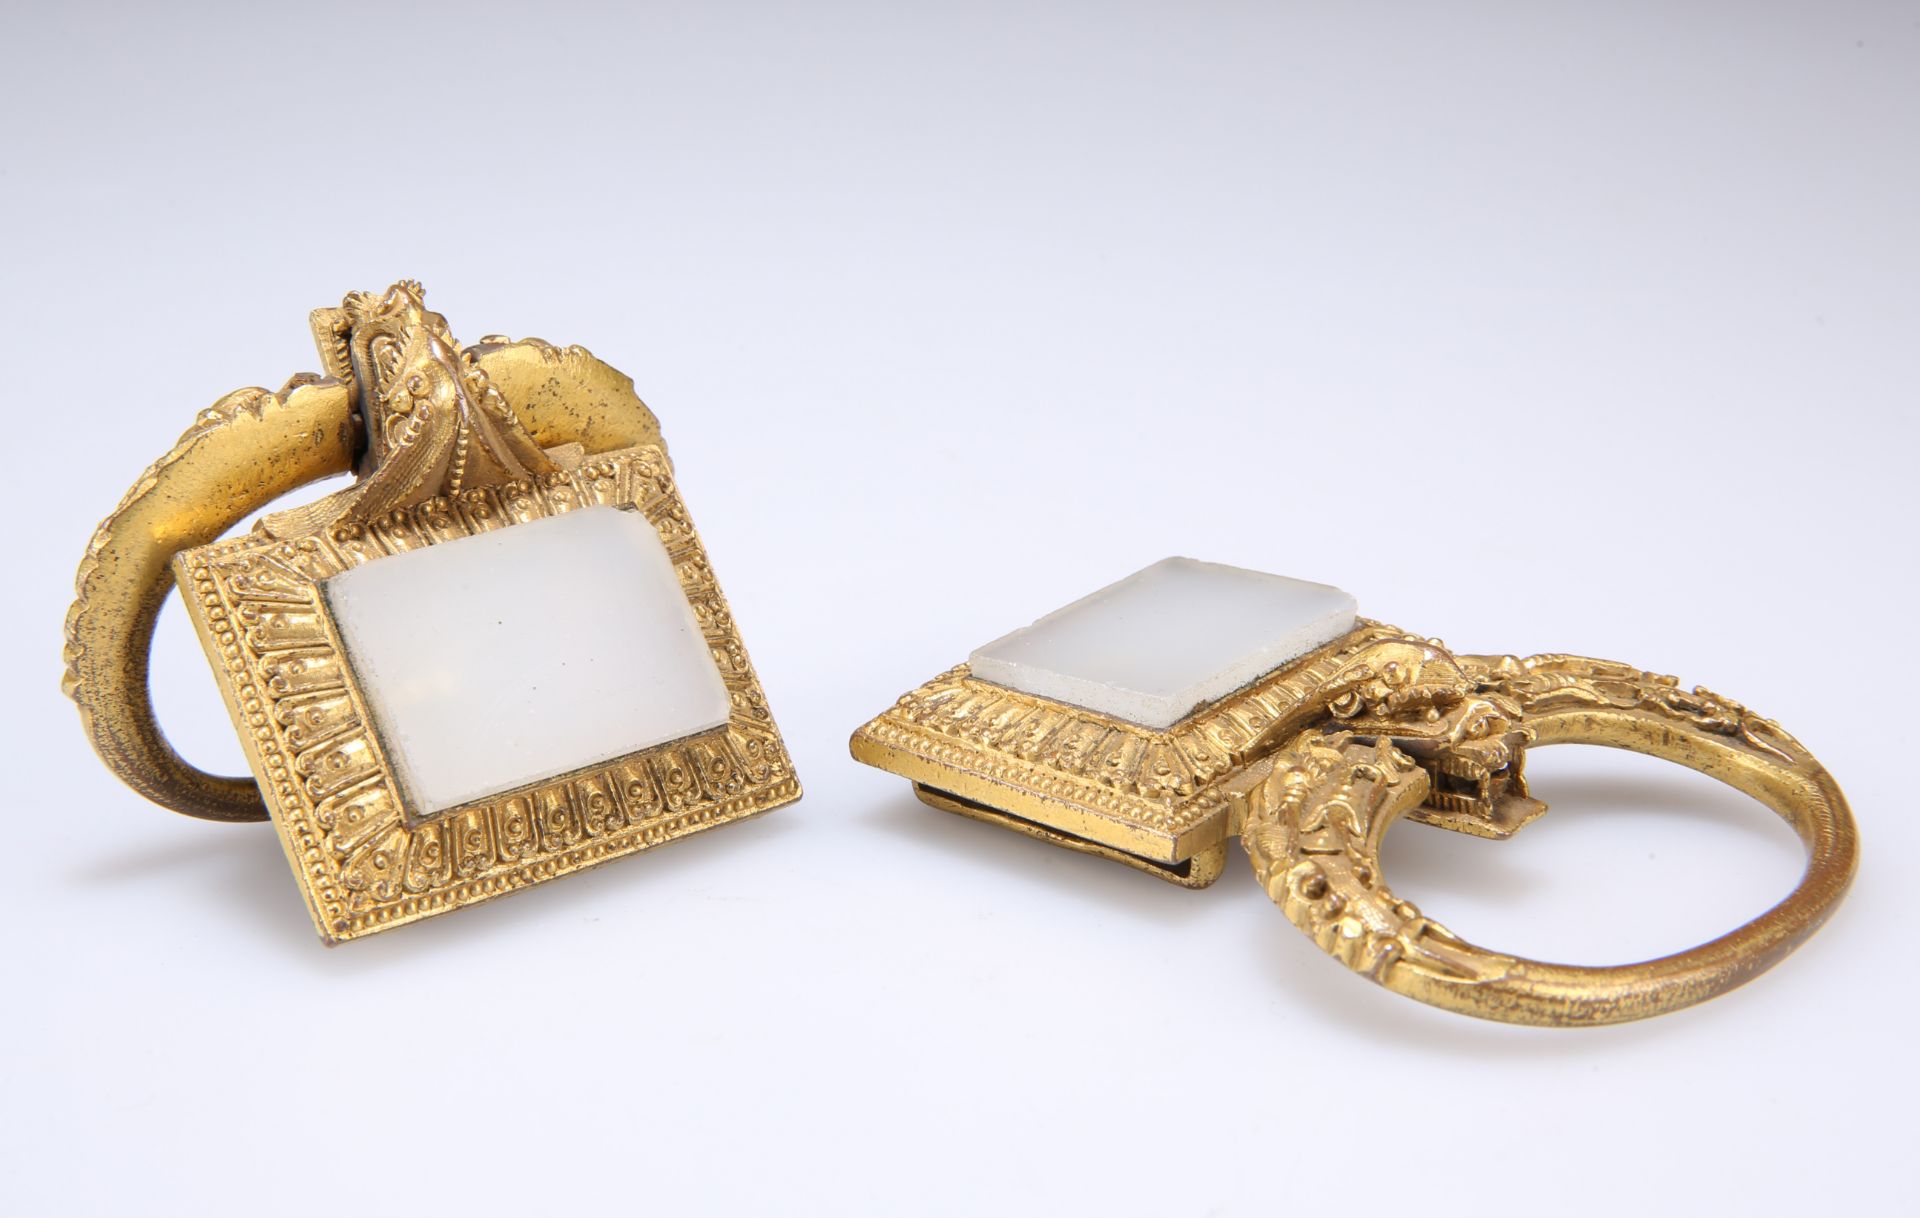 A PAIR OF 19TH CENTURY CHINESE GILT-METAL BUCKLES